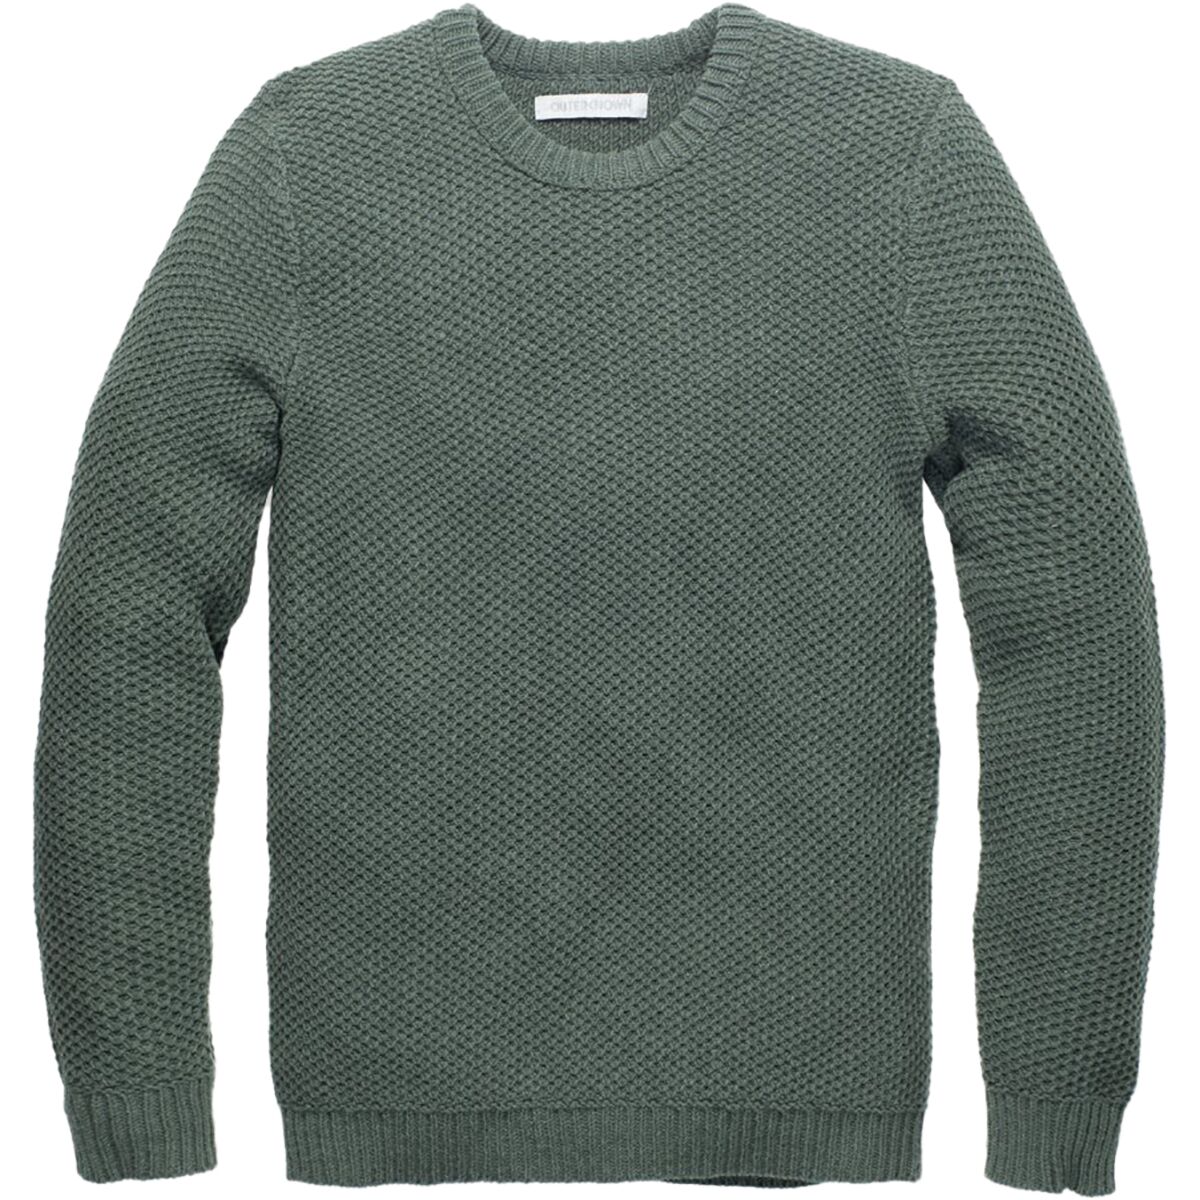 Outerknown Eastbank Crew Sweater - Men's